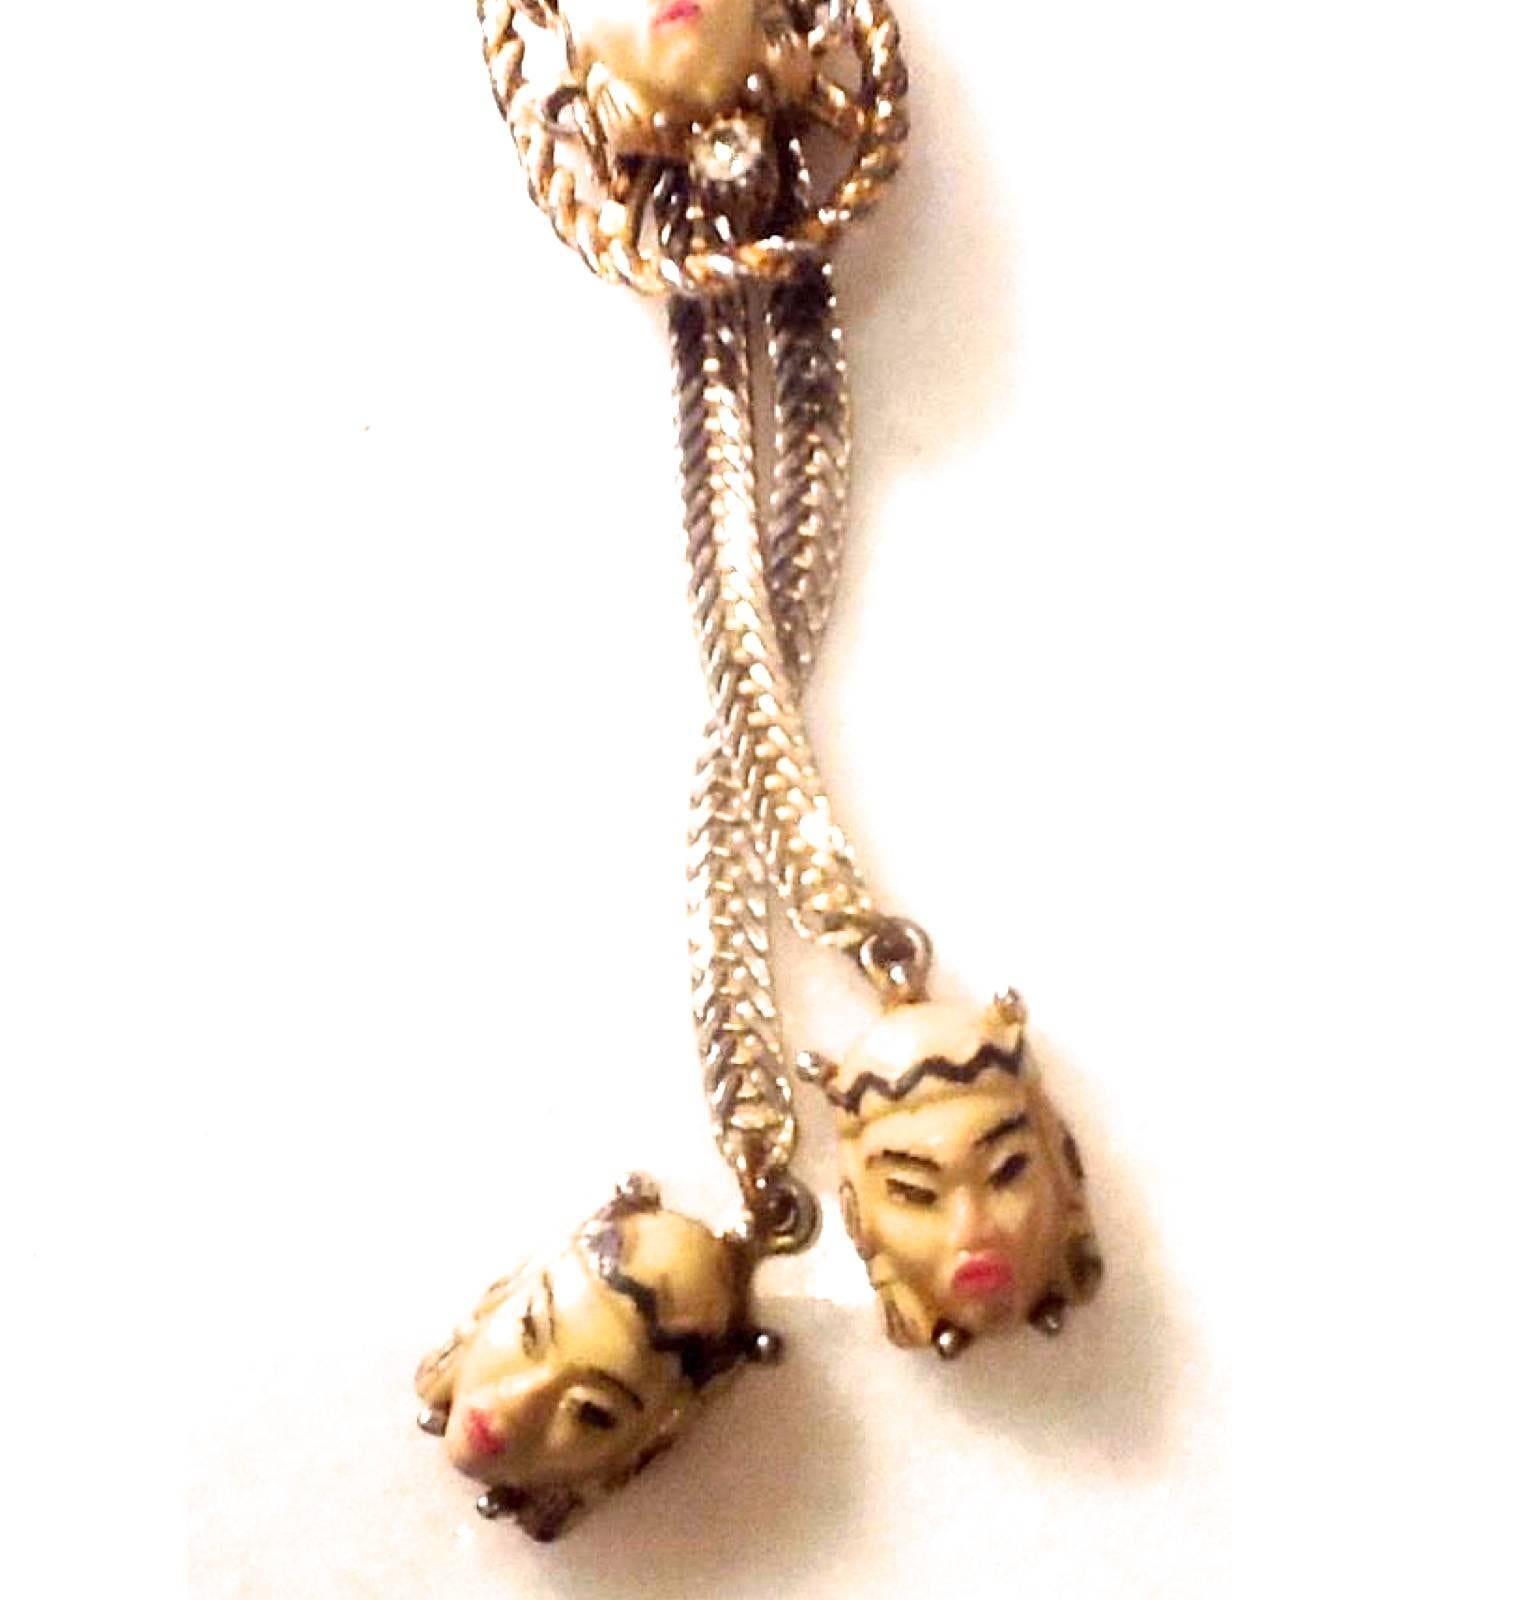 Presented here is a beautiful example of a Selro lariat necklace. The necklace has a tie of a female figure at the slide of the necklace. There is a charm on the end of each gold tone metal cord also with smaller Asian style heads. The slide of the